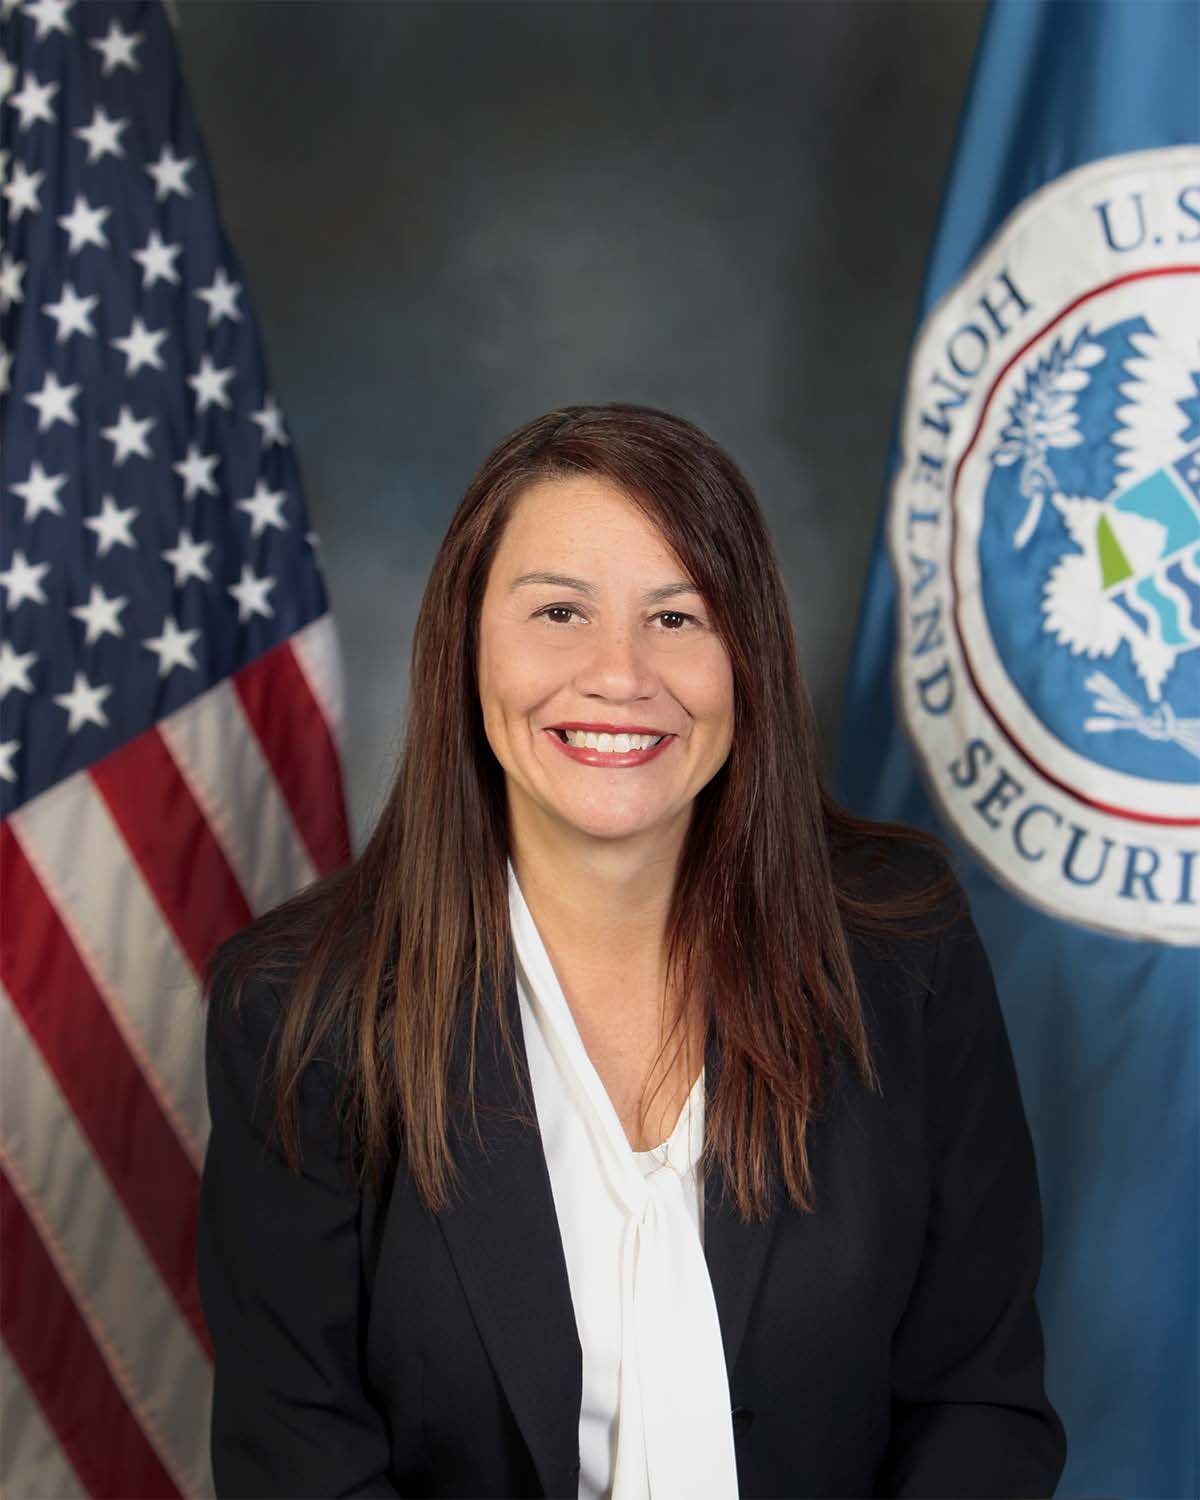 FLETC selects Ariana M. Roddini as Associate Director for Training Operations (ADT)